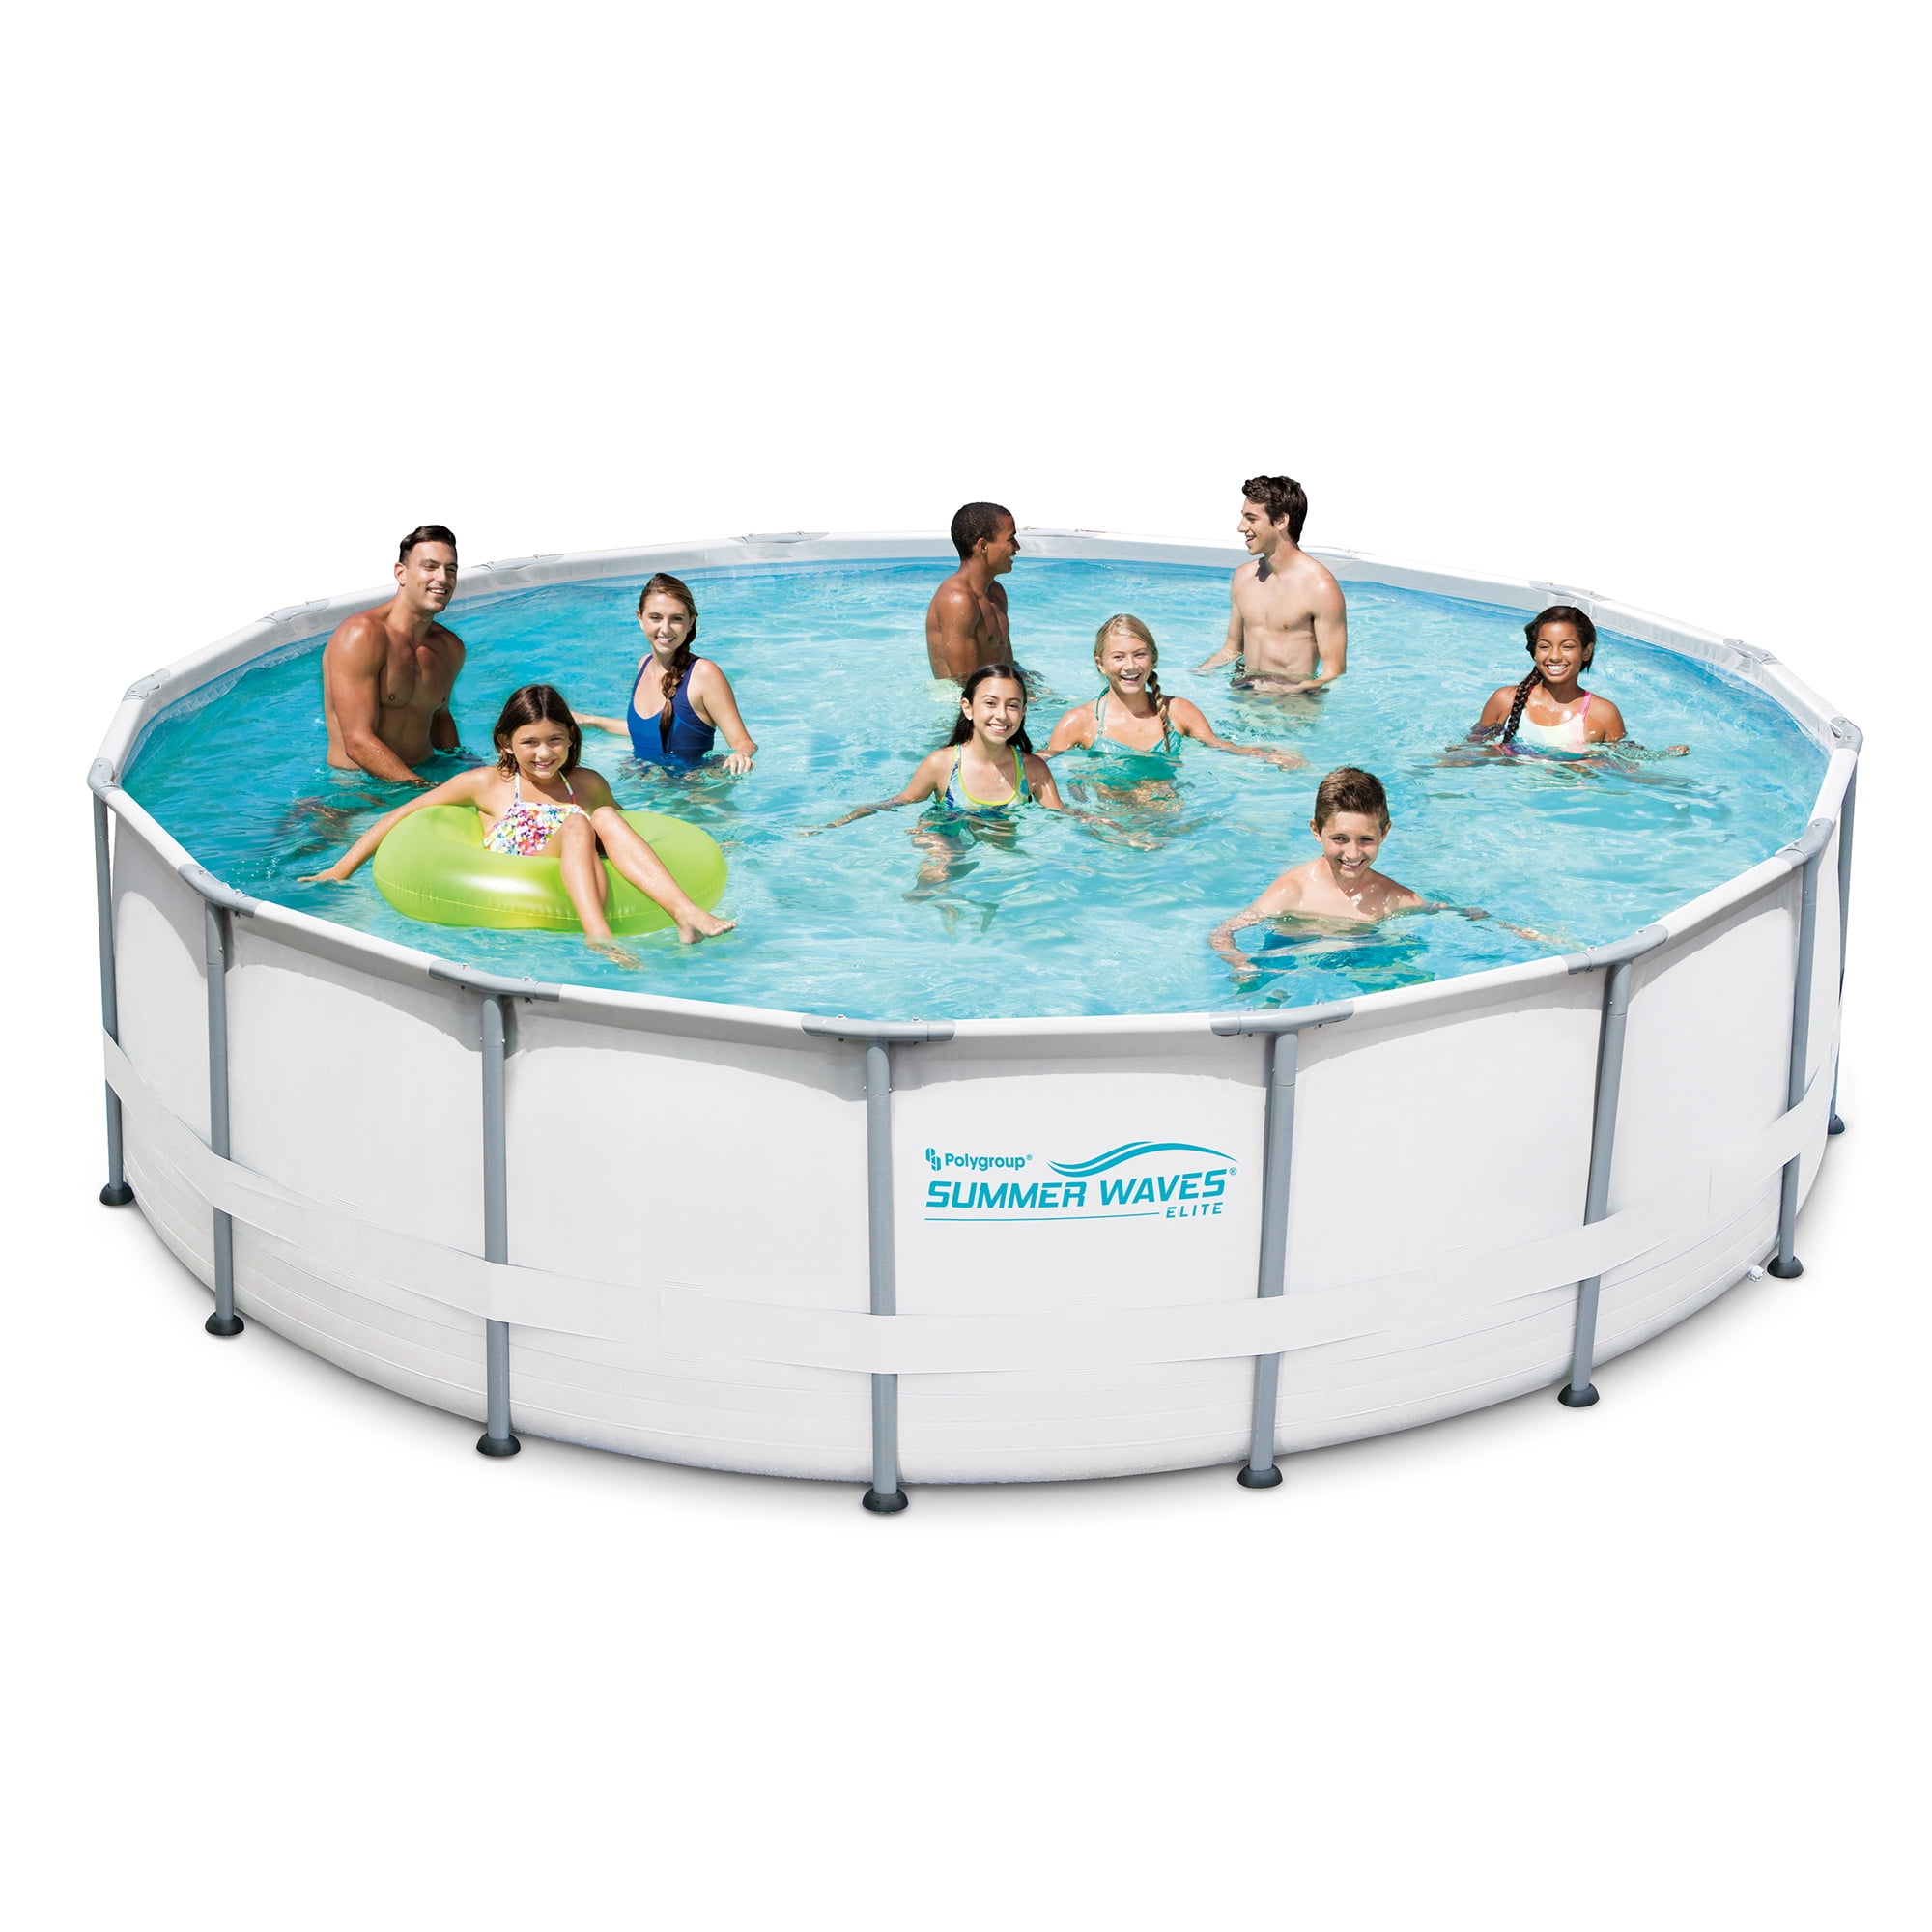 Summer Waves® 16ft Elite Frame Pool with Filter Pump, Cover, and Ladder